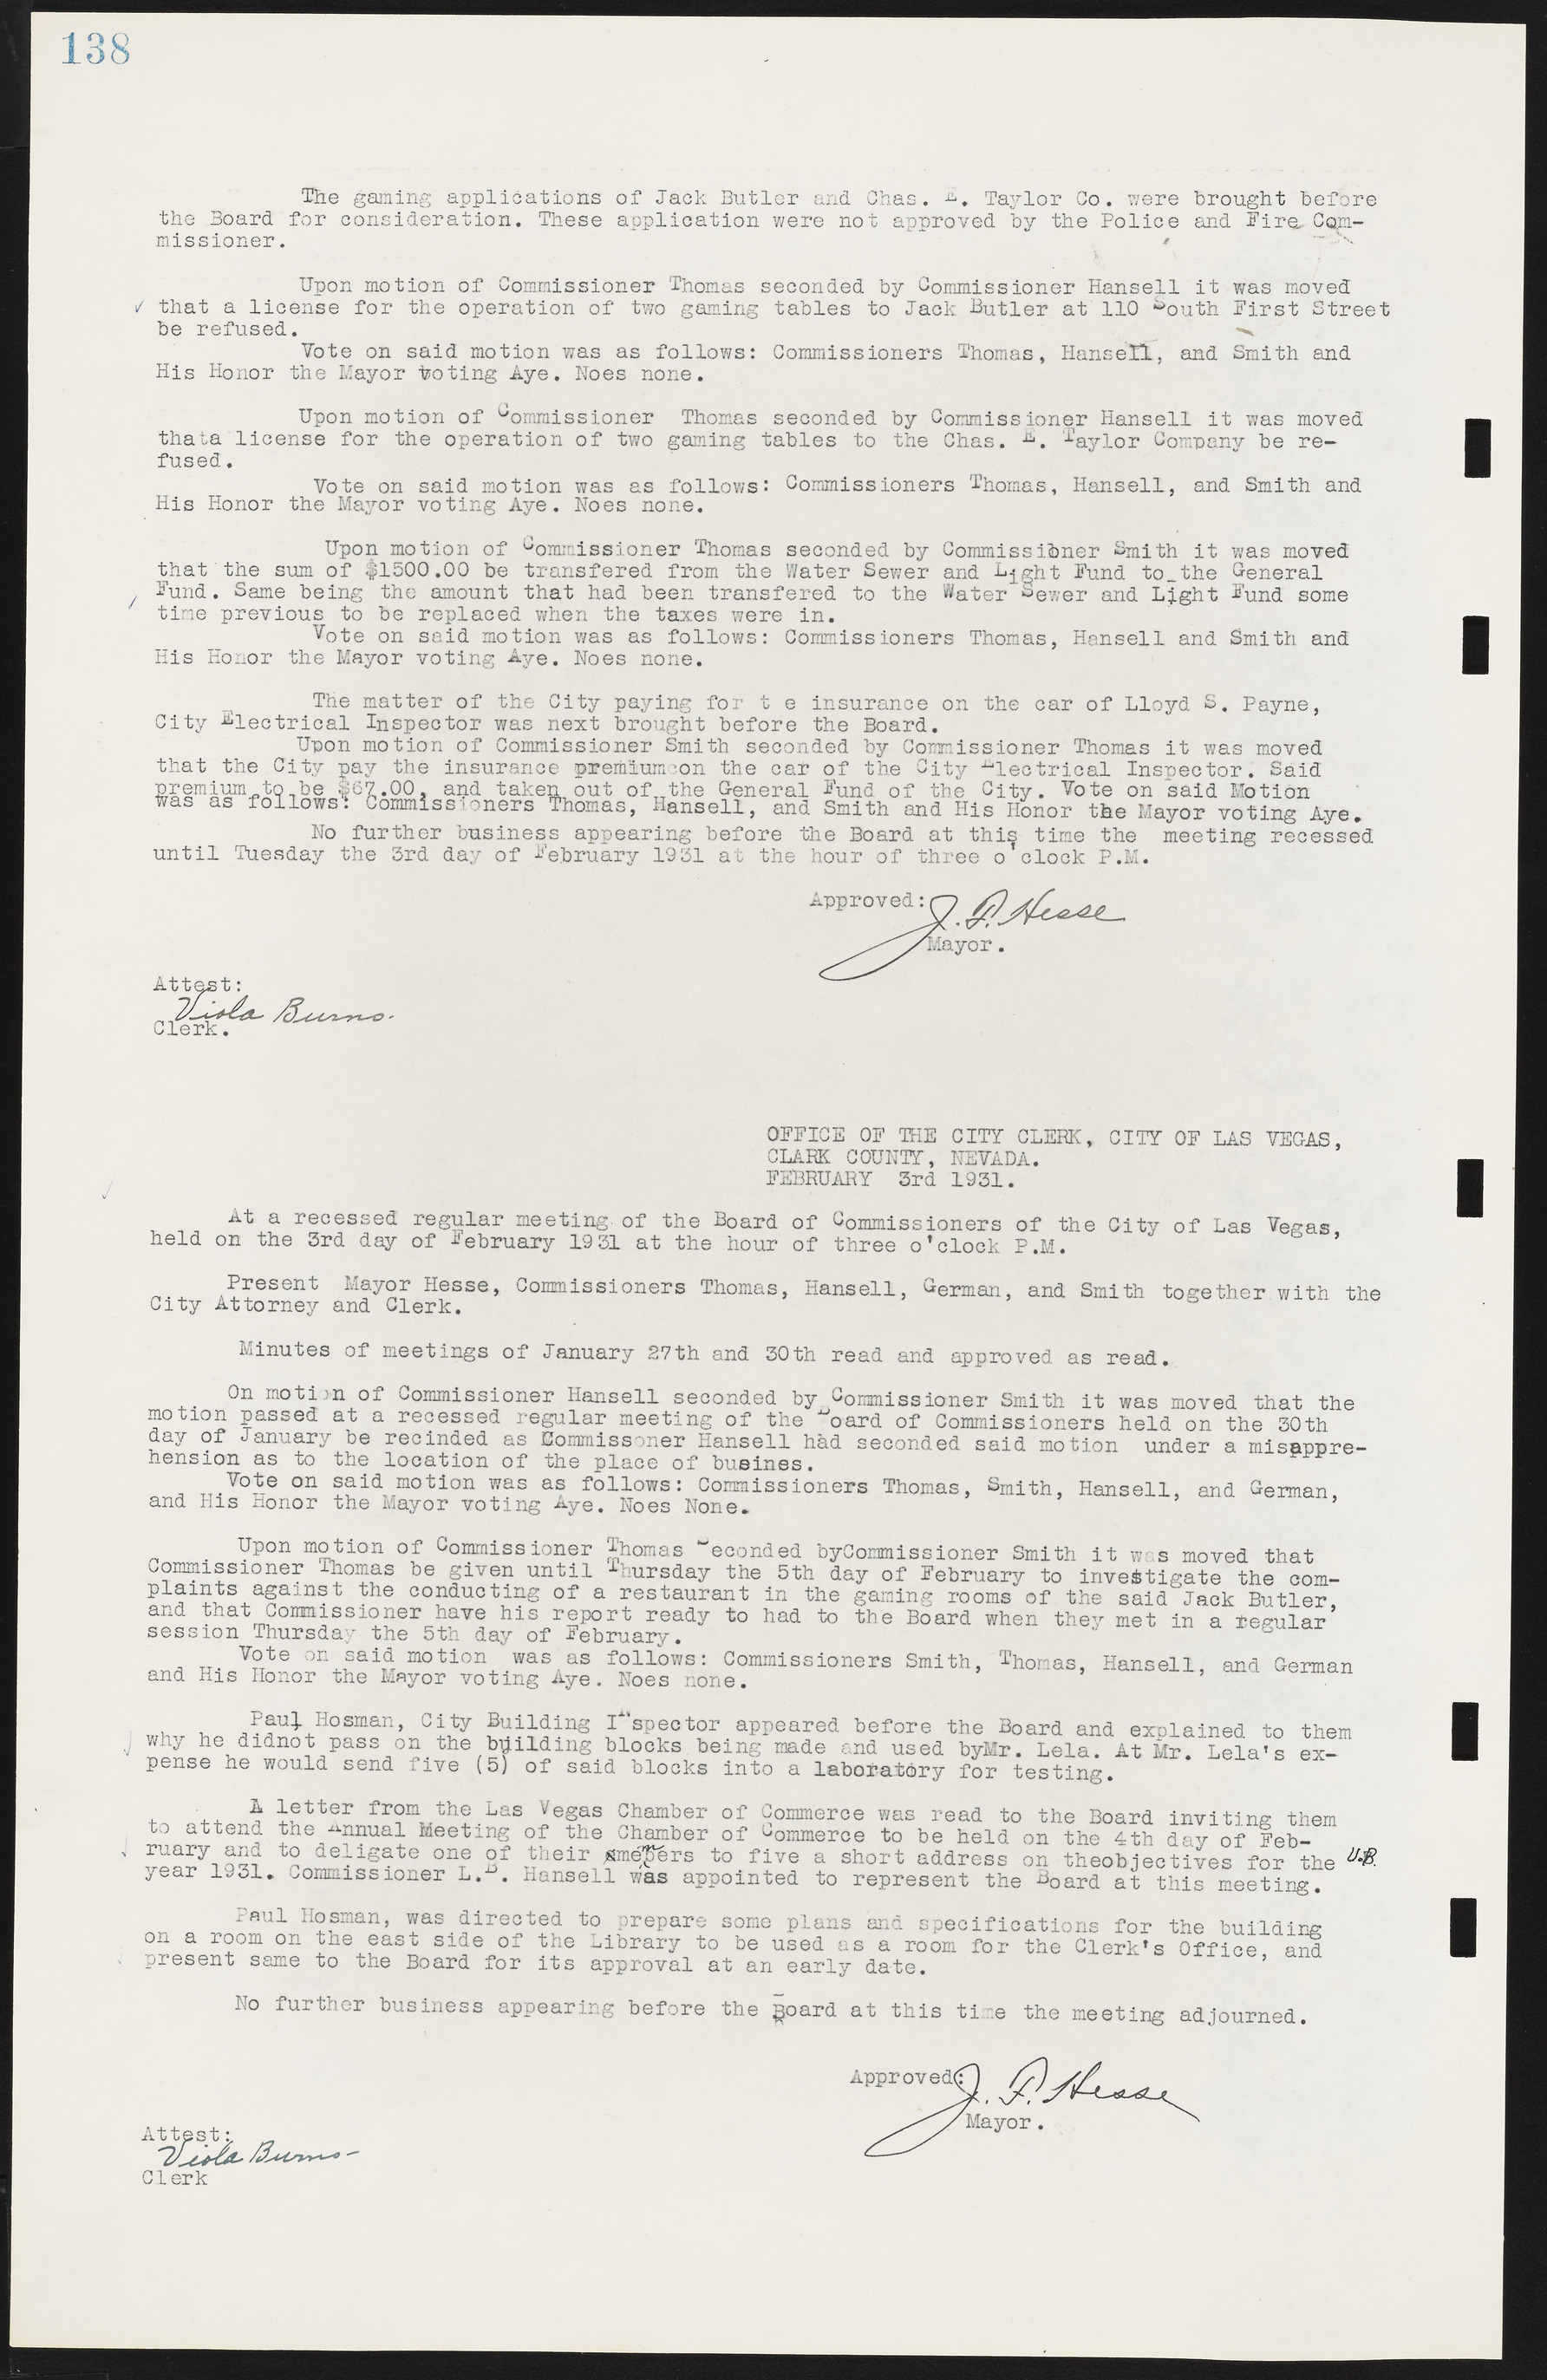 Las Vegas City Commission Minutes, May 14, 1929 to February 11, 1937, lvc000003-144